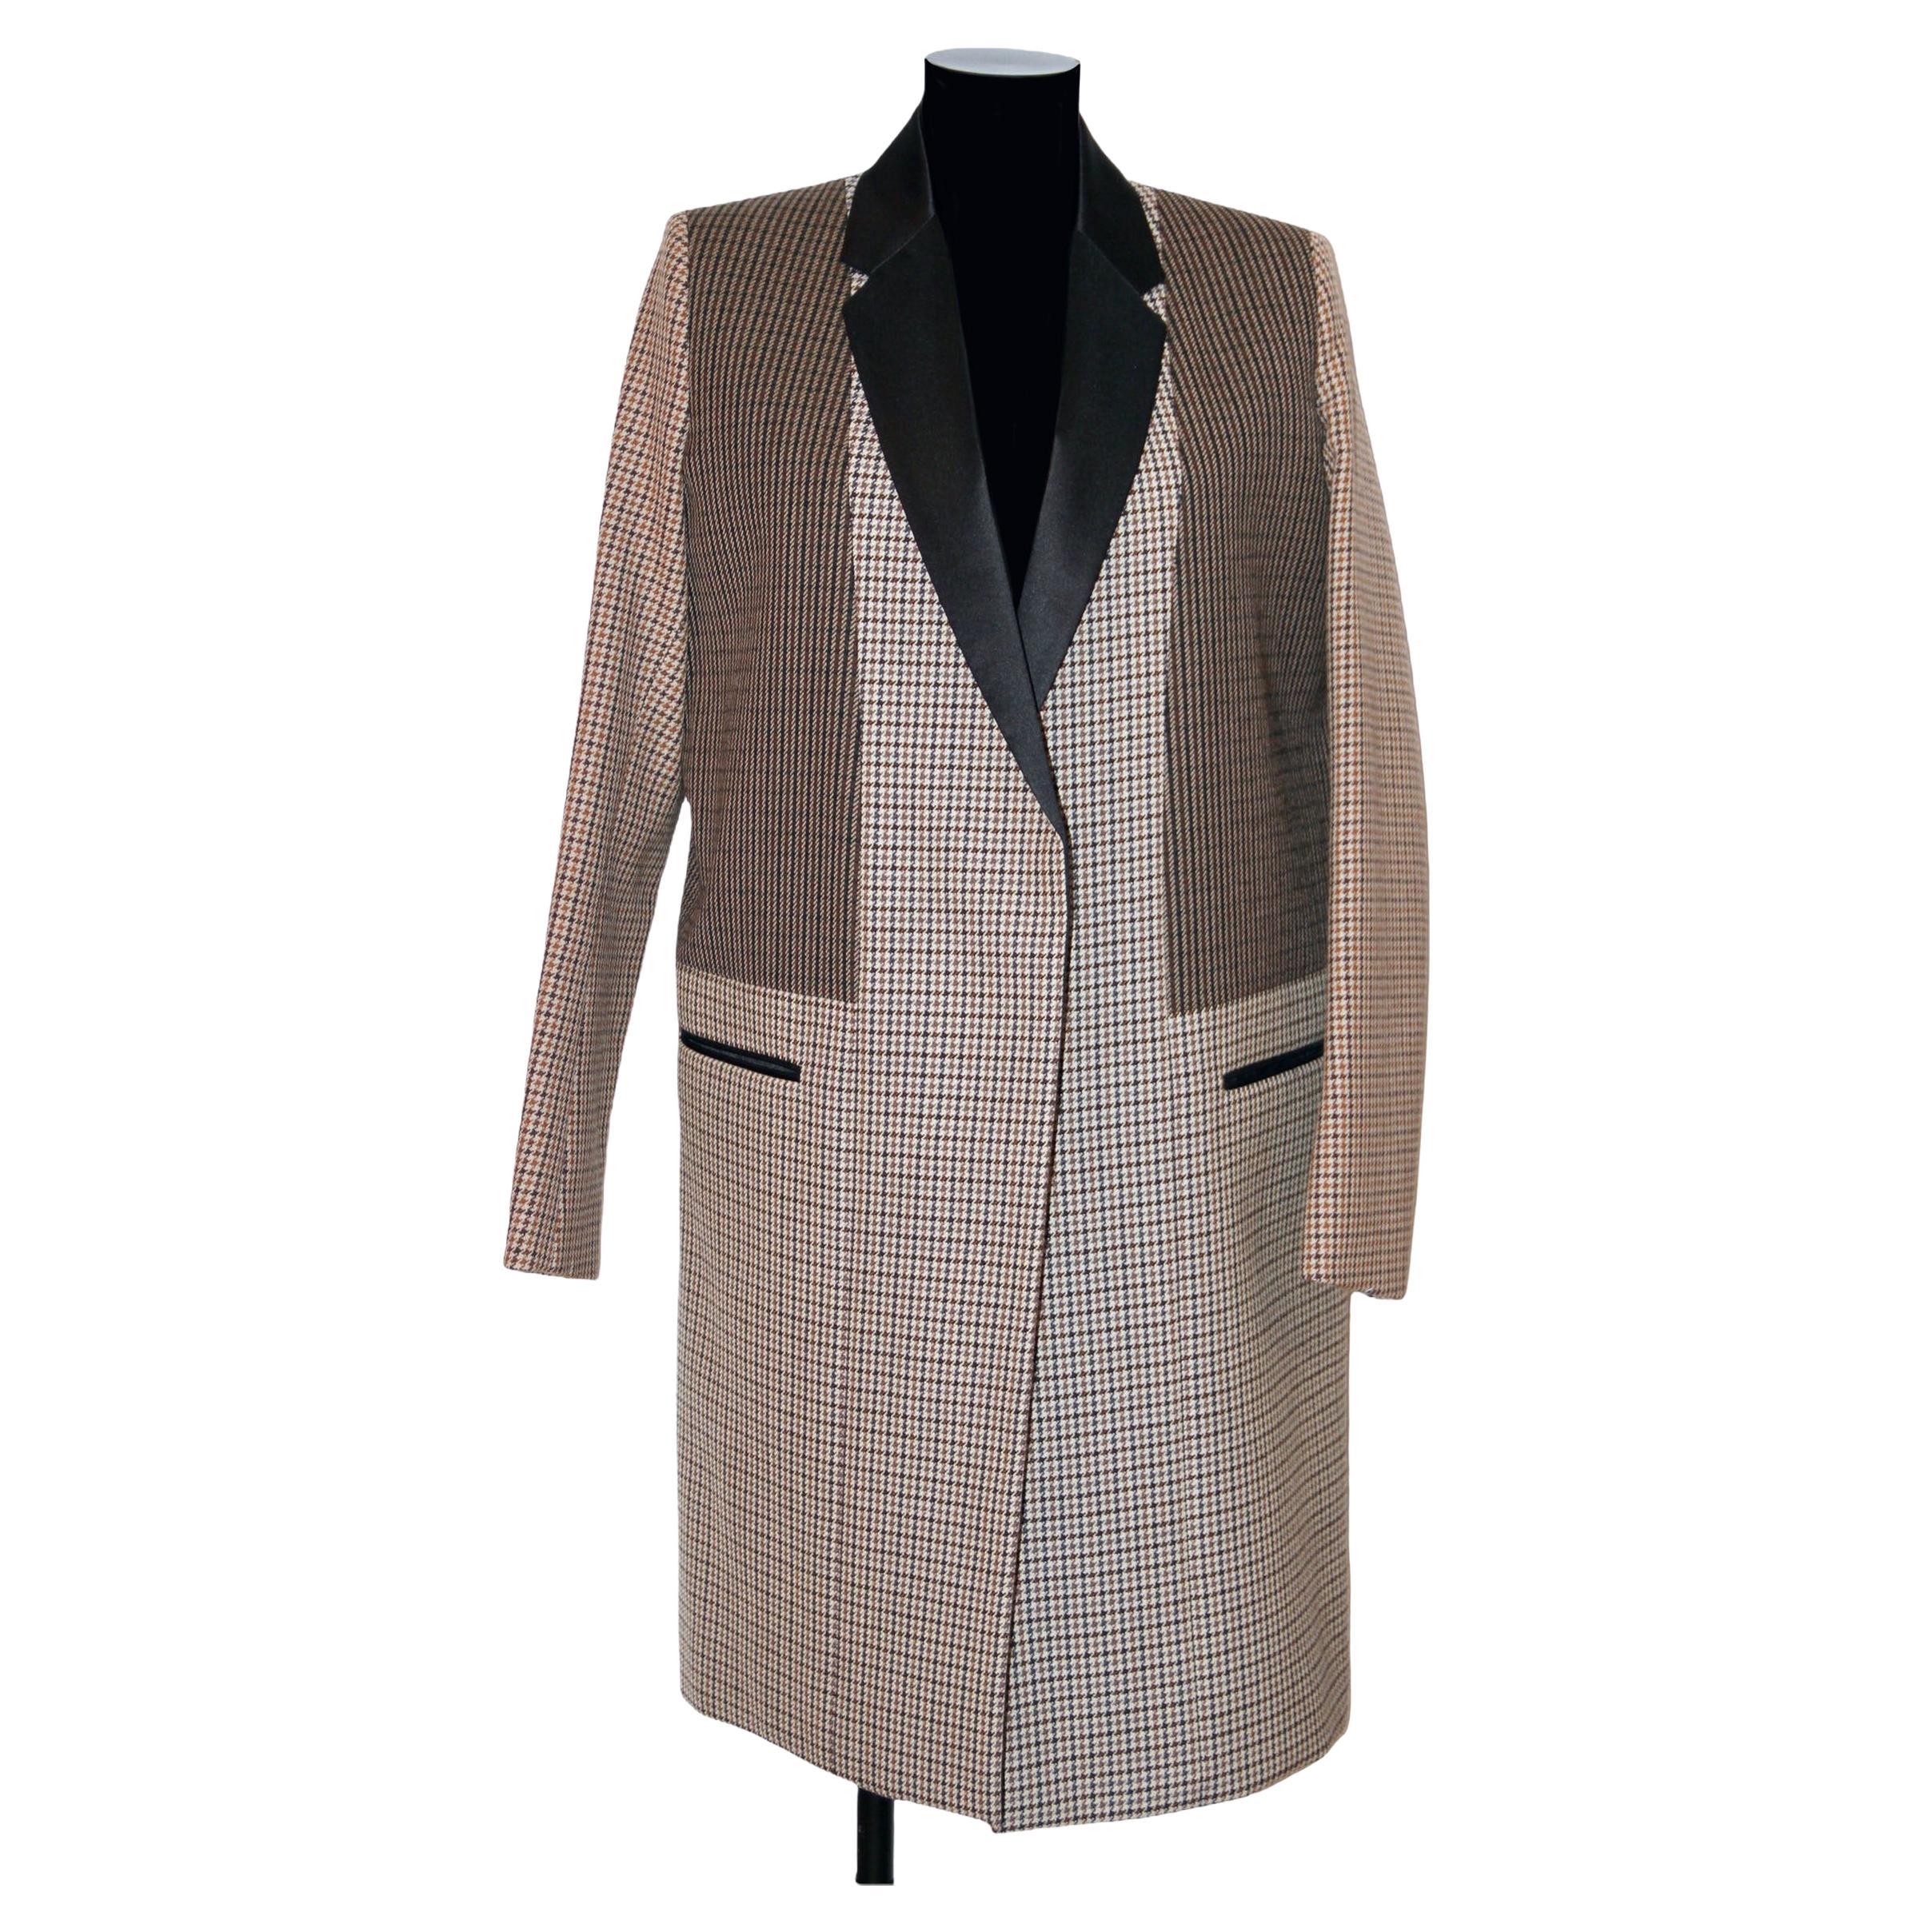 Céline Pre Fall 2011 Houndstooth Coat by Phoebe Philo